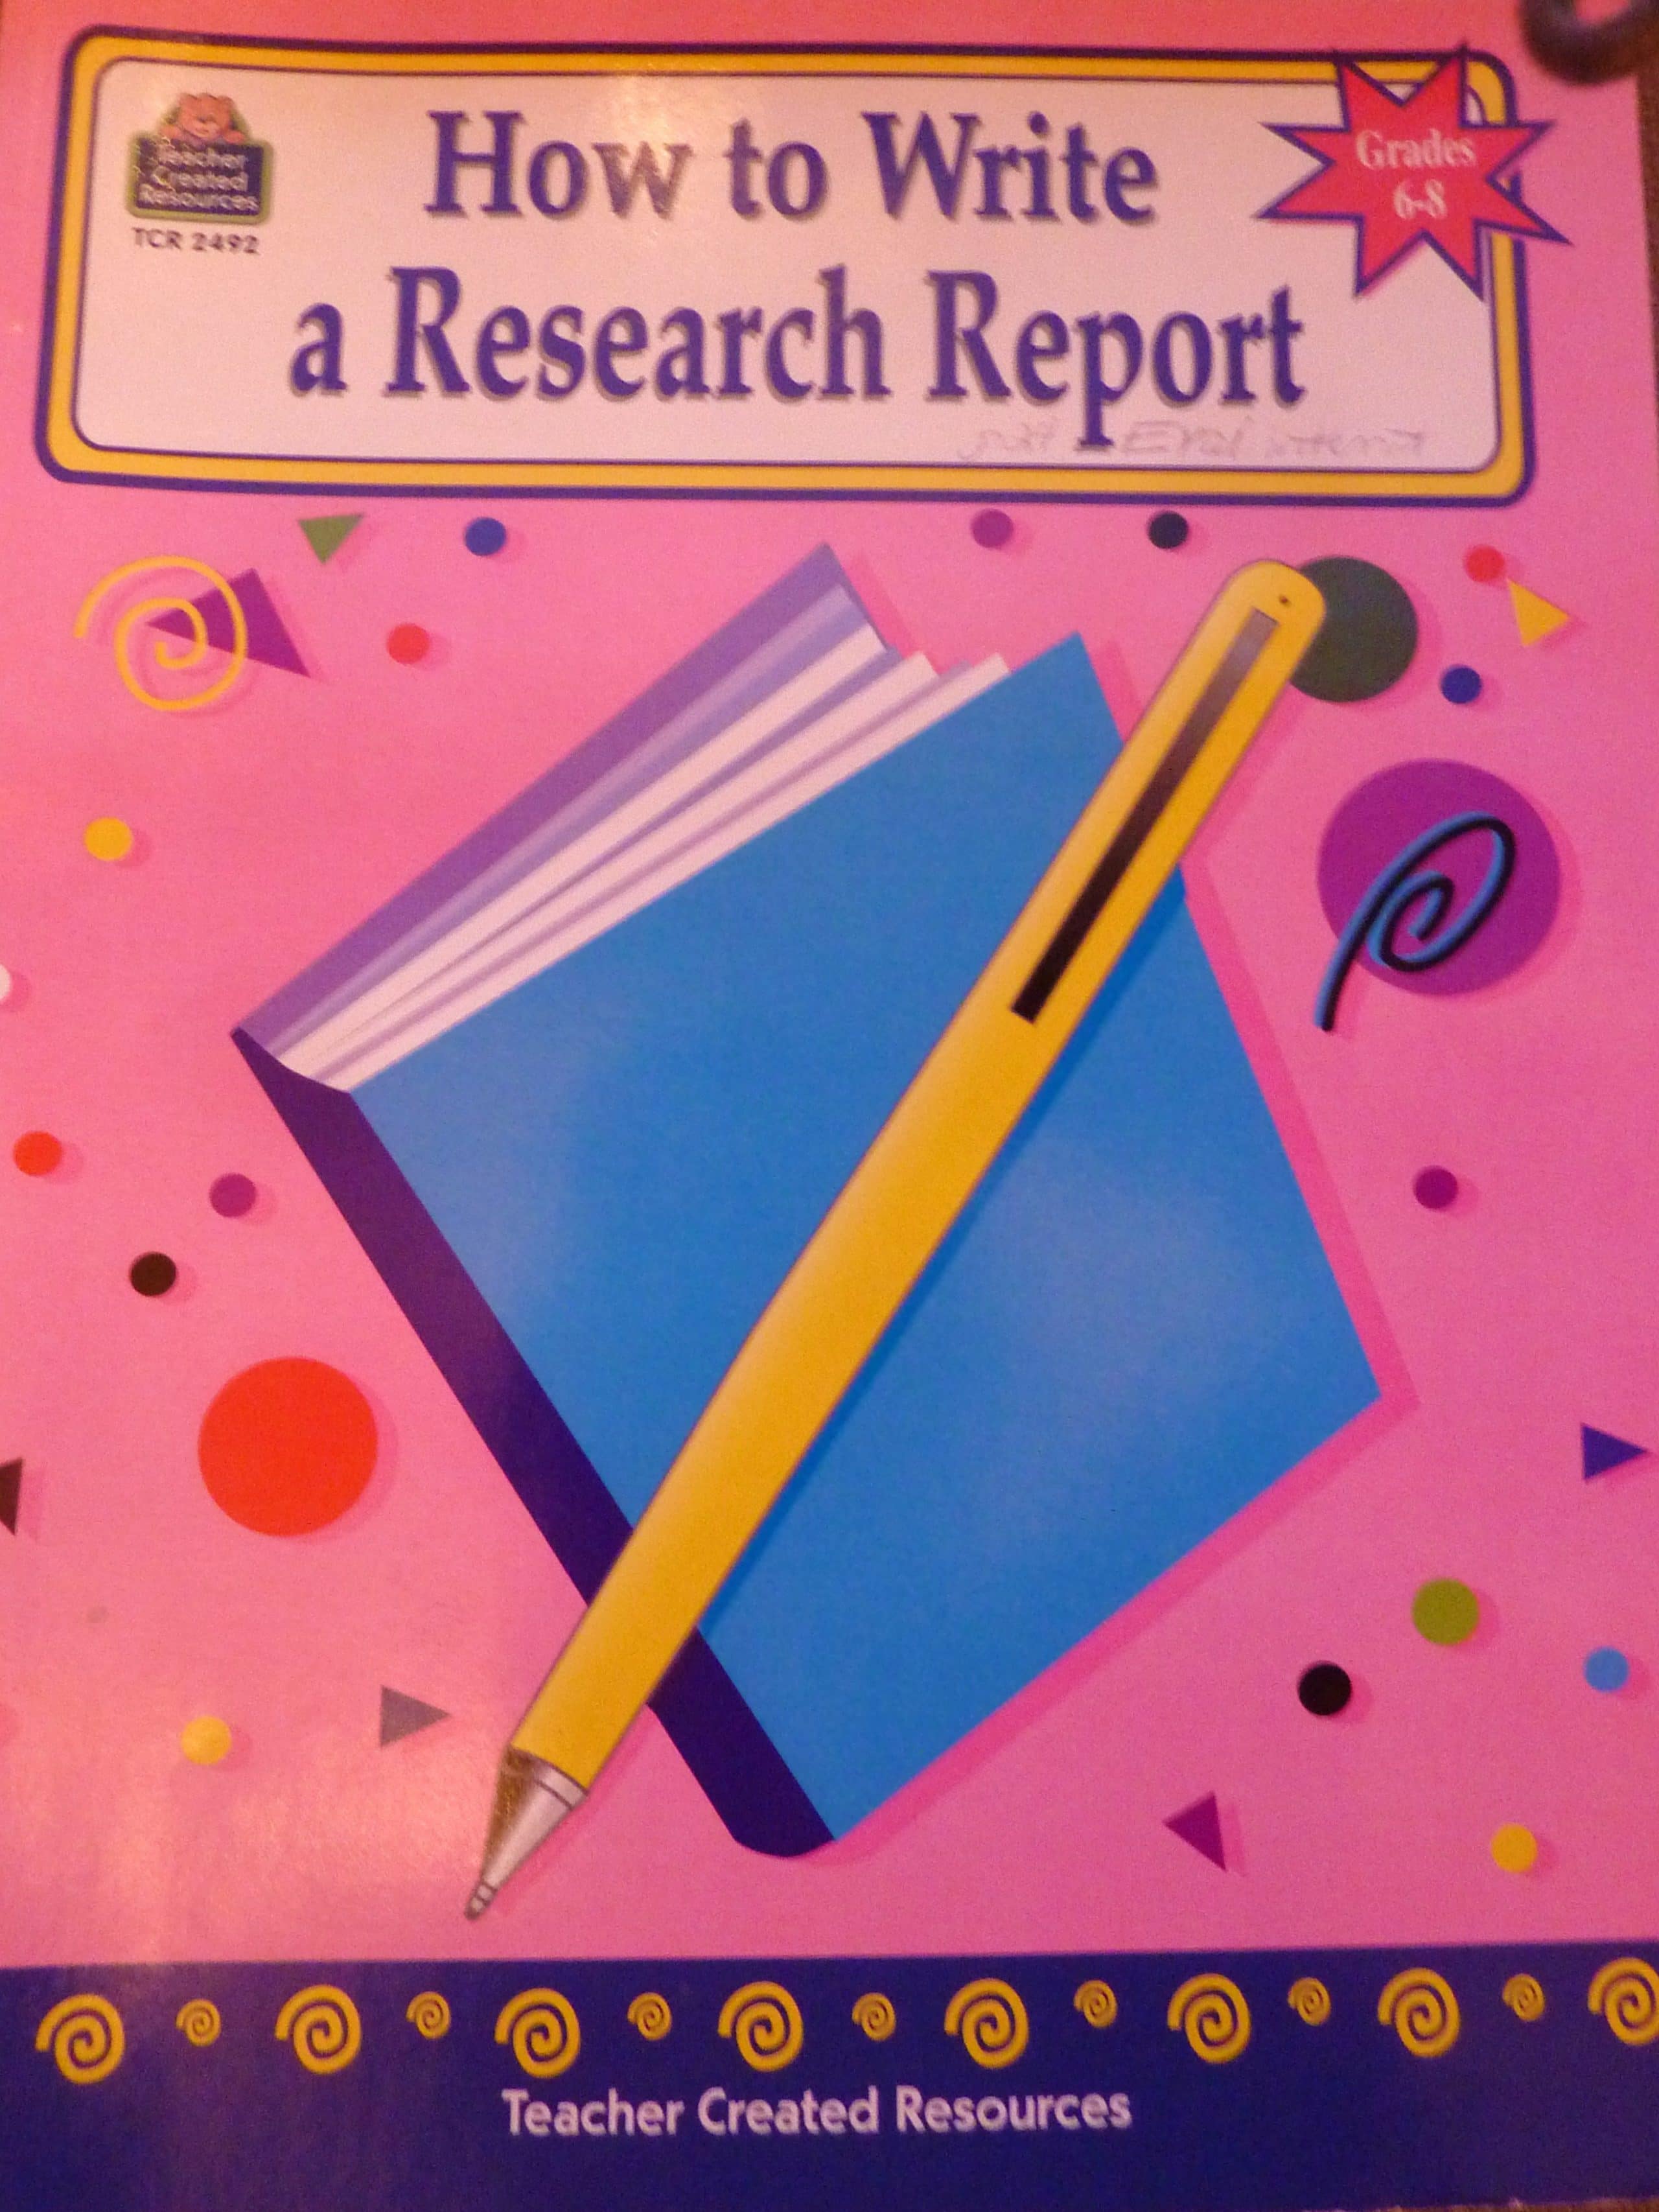 Middle School Writing – How to Write a Research Report – My Review